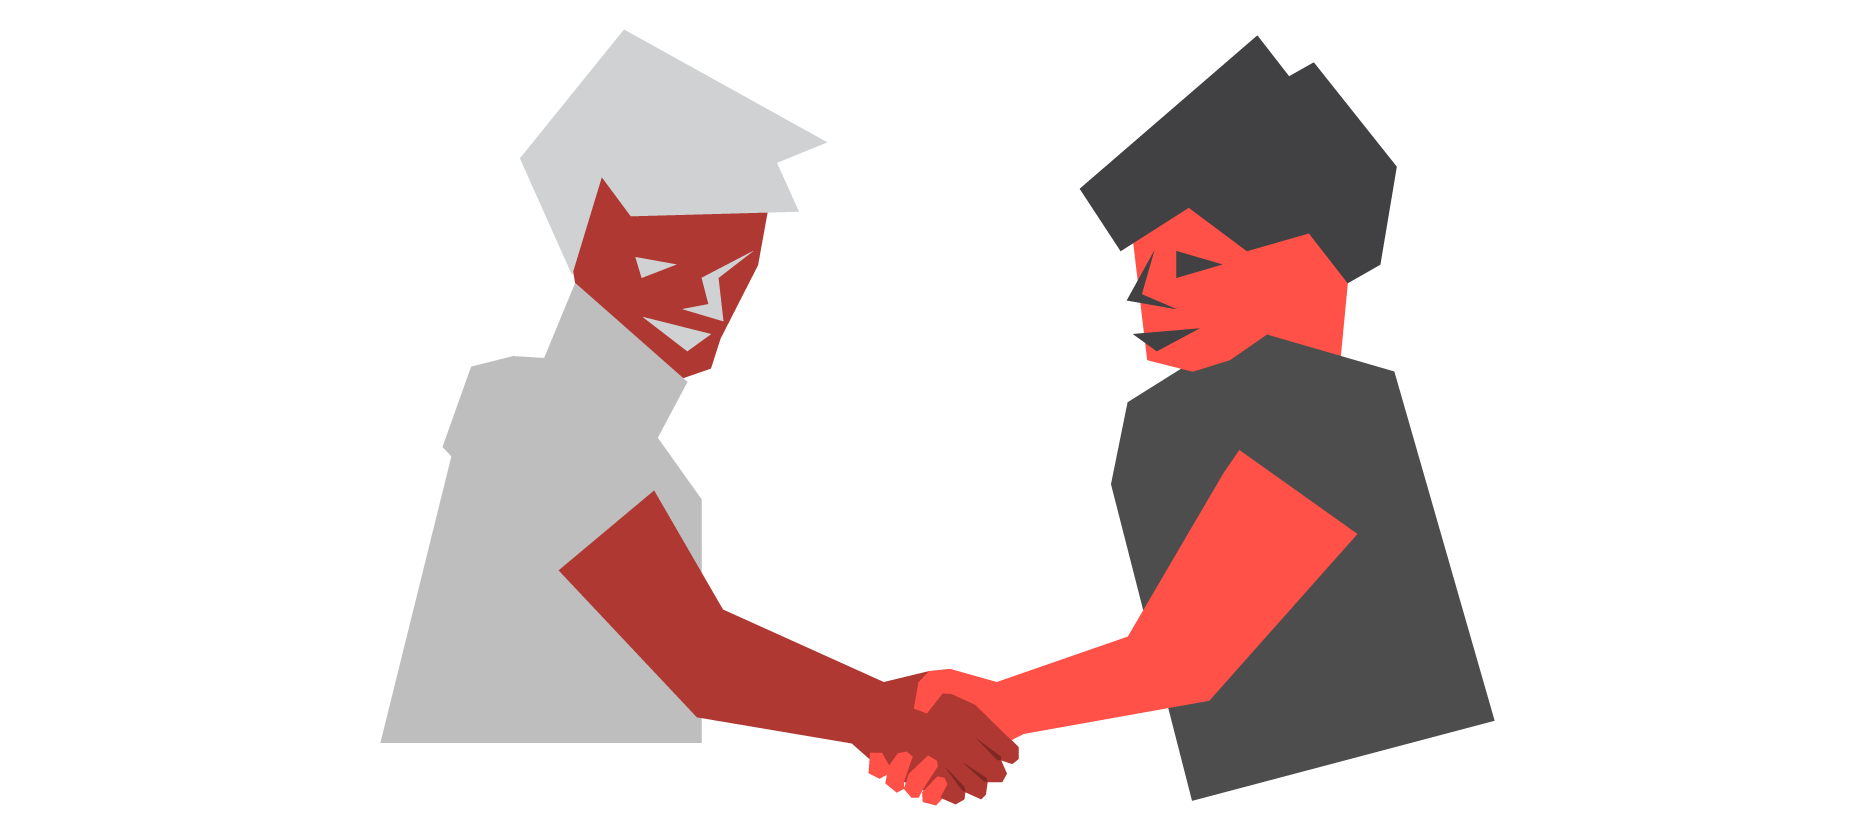 An illustration of two figures shaking hands.